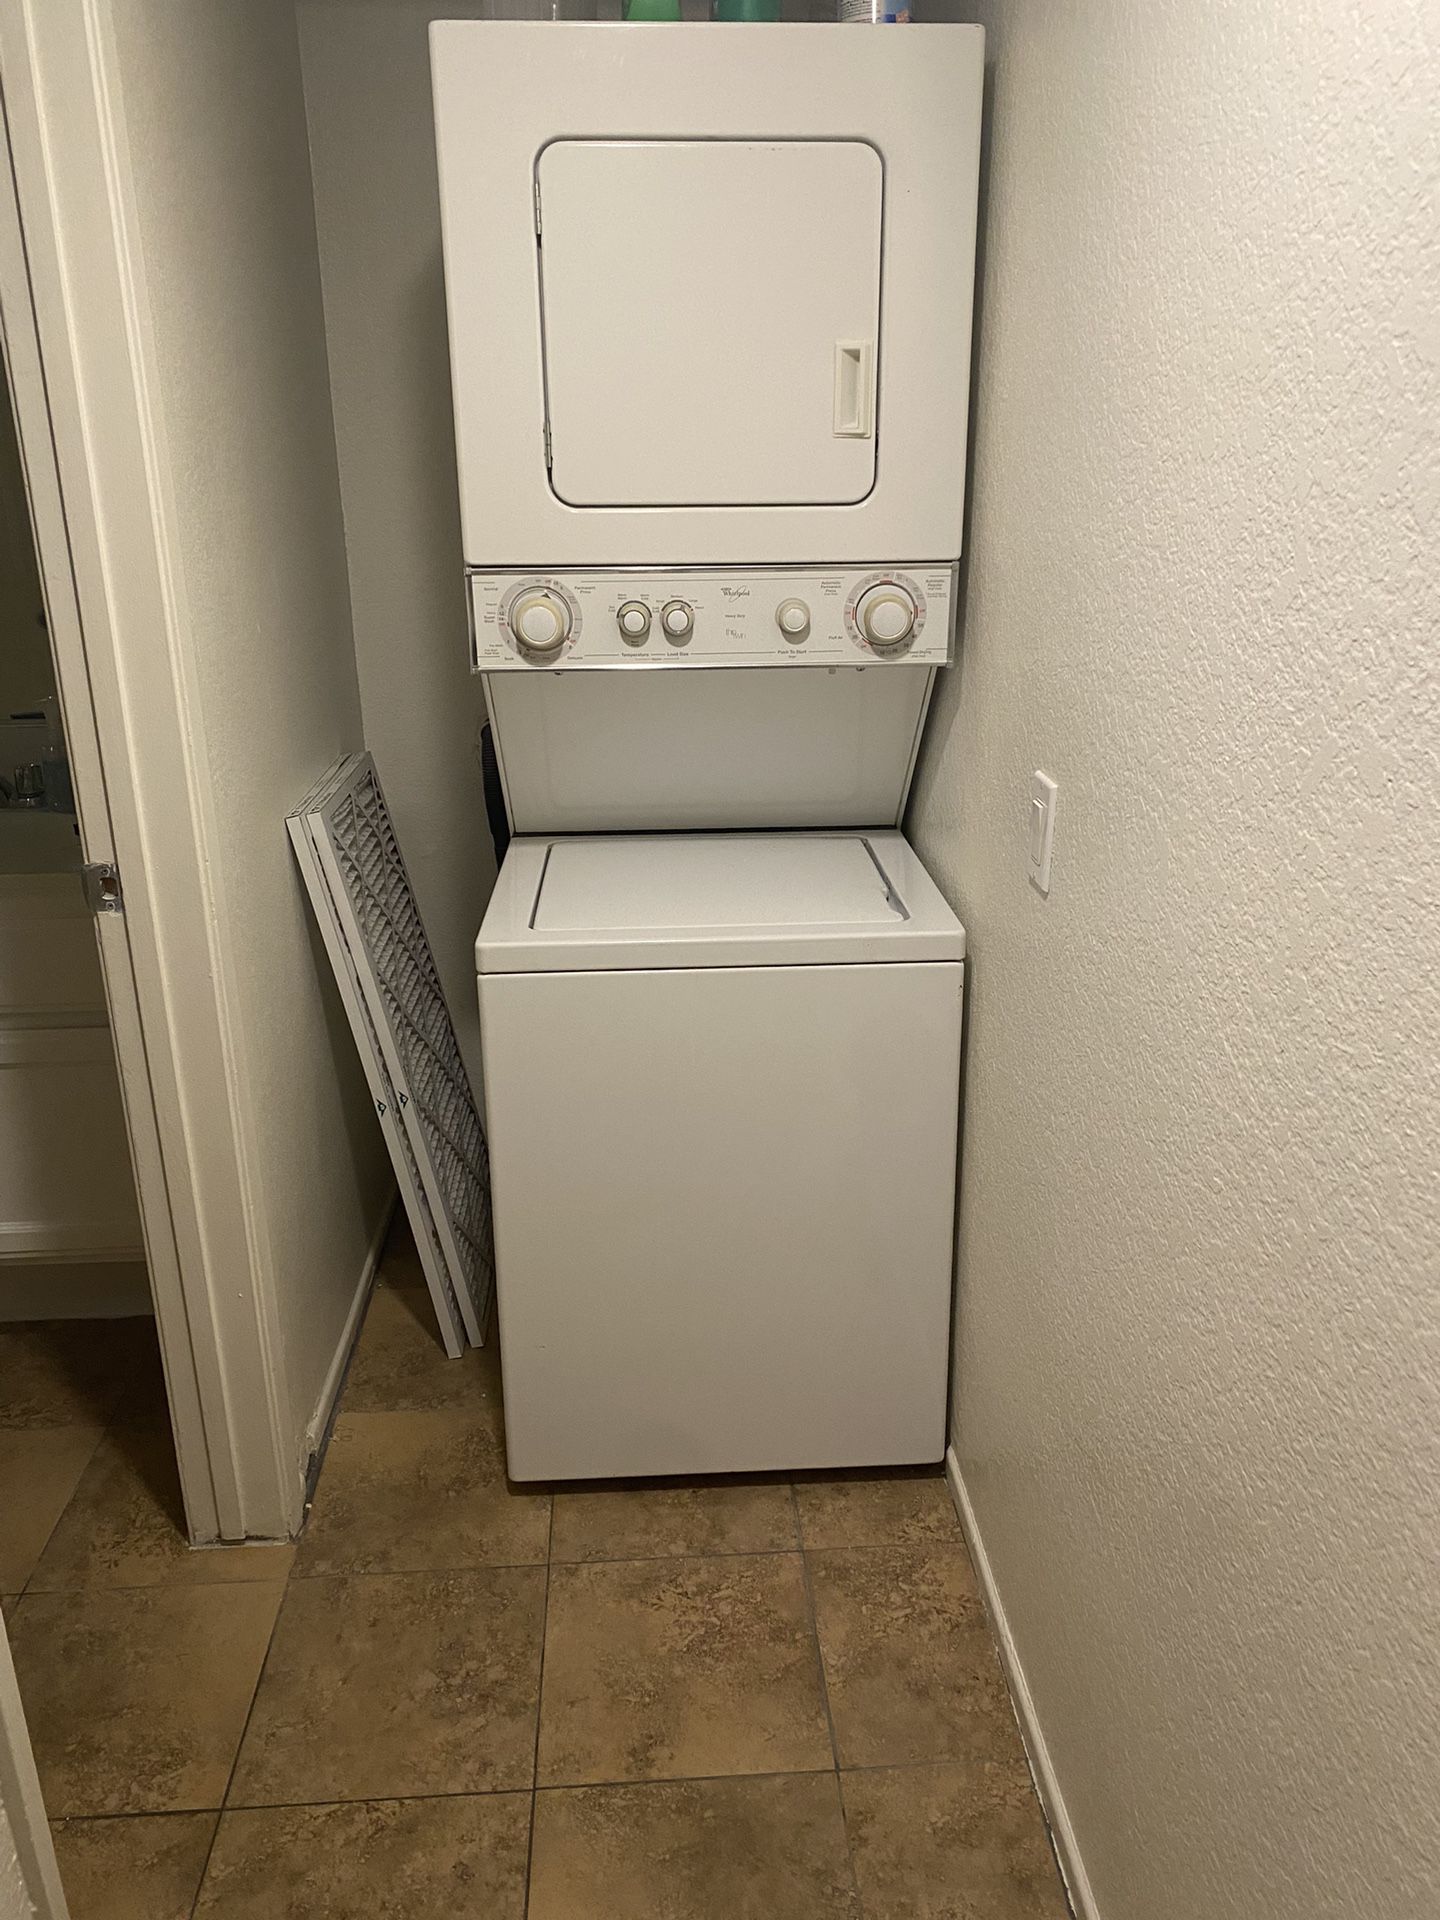 Whirlpool Thin Twin Stacked Washer And Dryer